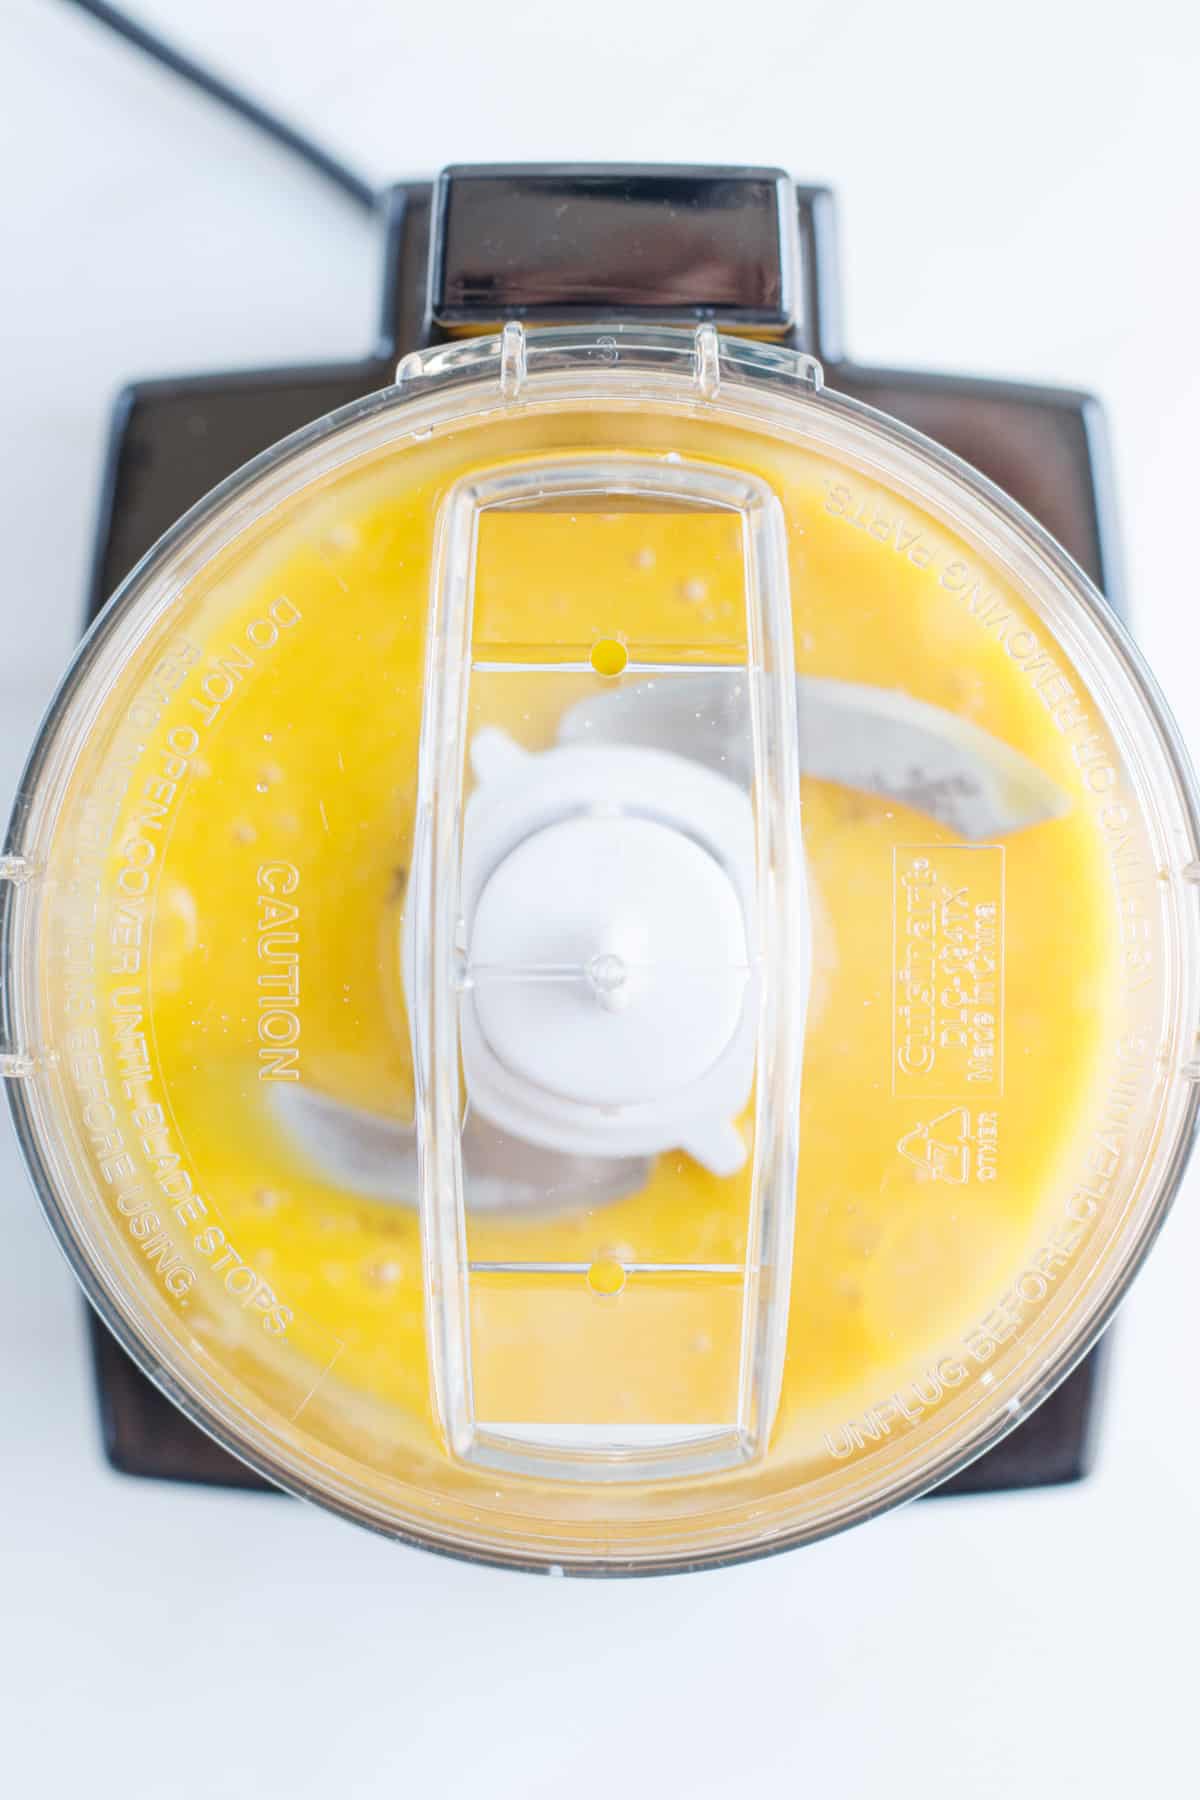 Egg yolks mixing in a food processor.